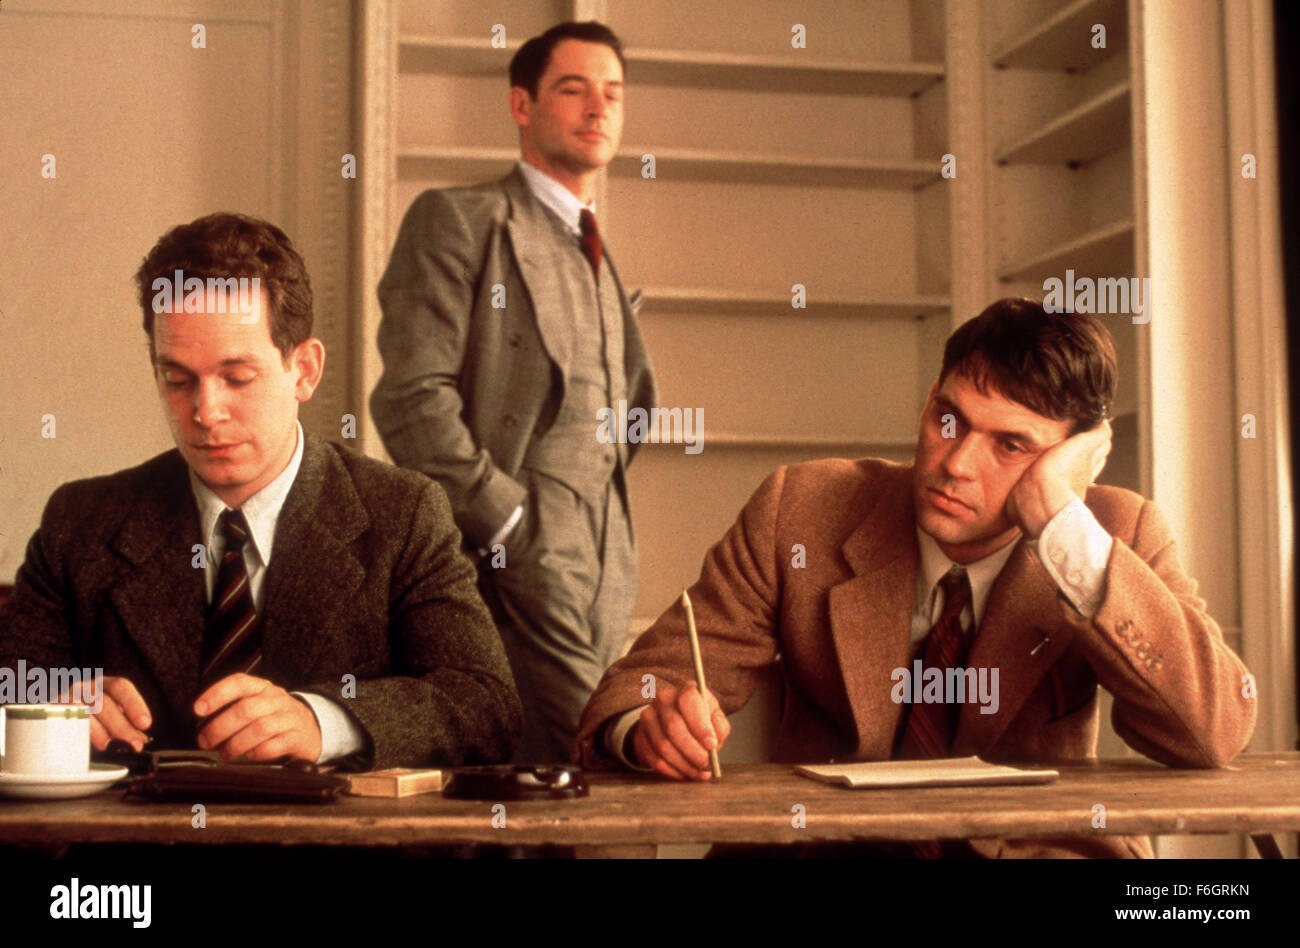 Jan 22, 2001; London, England, UK; JEREMY NORTHAM (C) and DOUGRAY SCOTT (R) star as Wigram and Tom Jericho in the romantic drama/thriller 'Enigma' directed by Michael Apted. Stock Photo